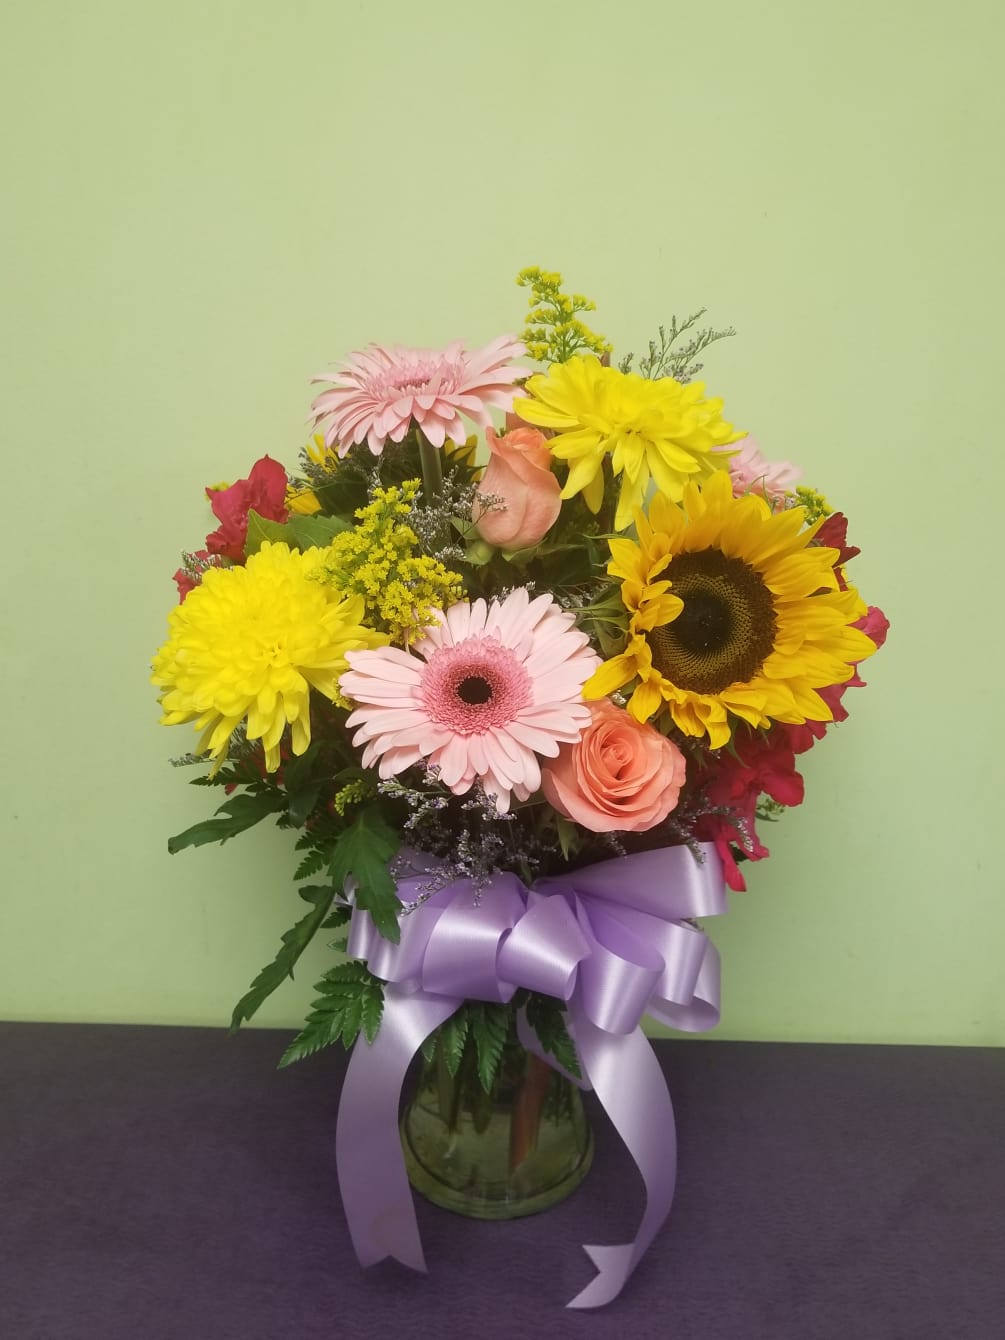 A beautiful garden of flowers is enough to send some sunshine! Arrangement